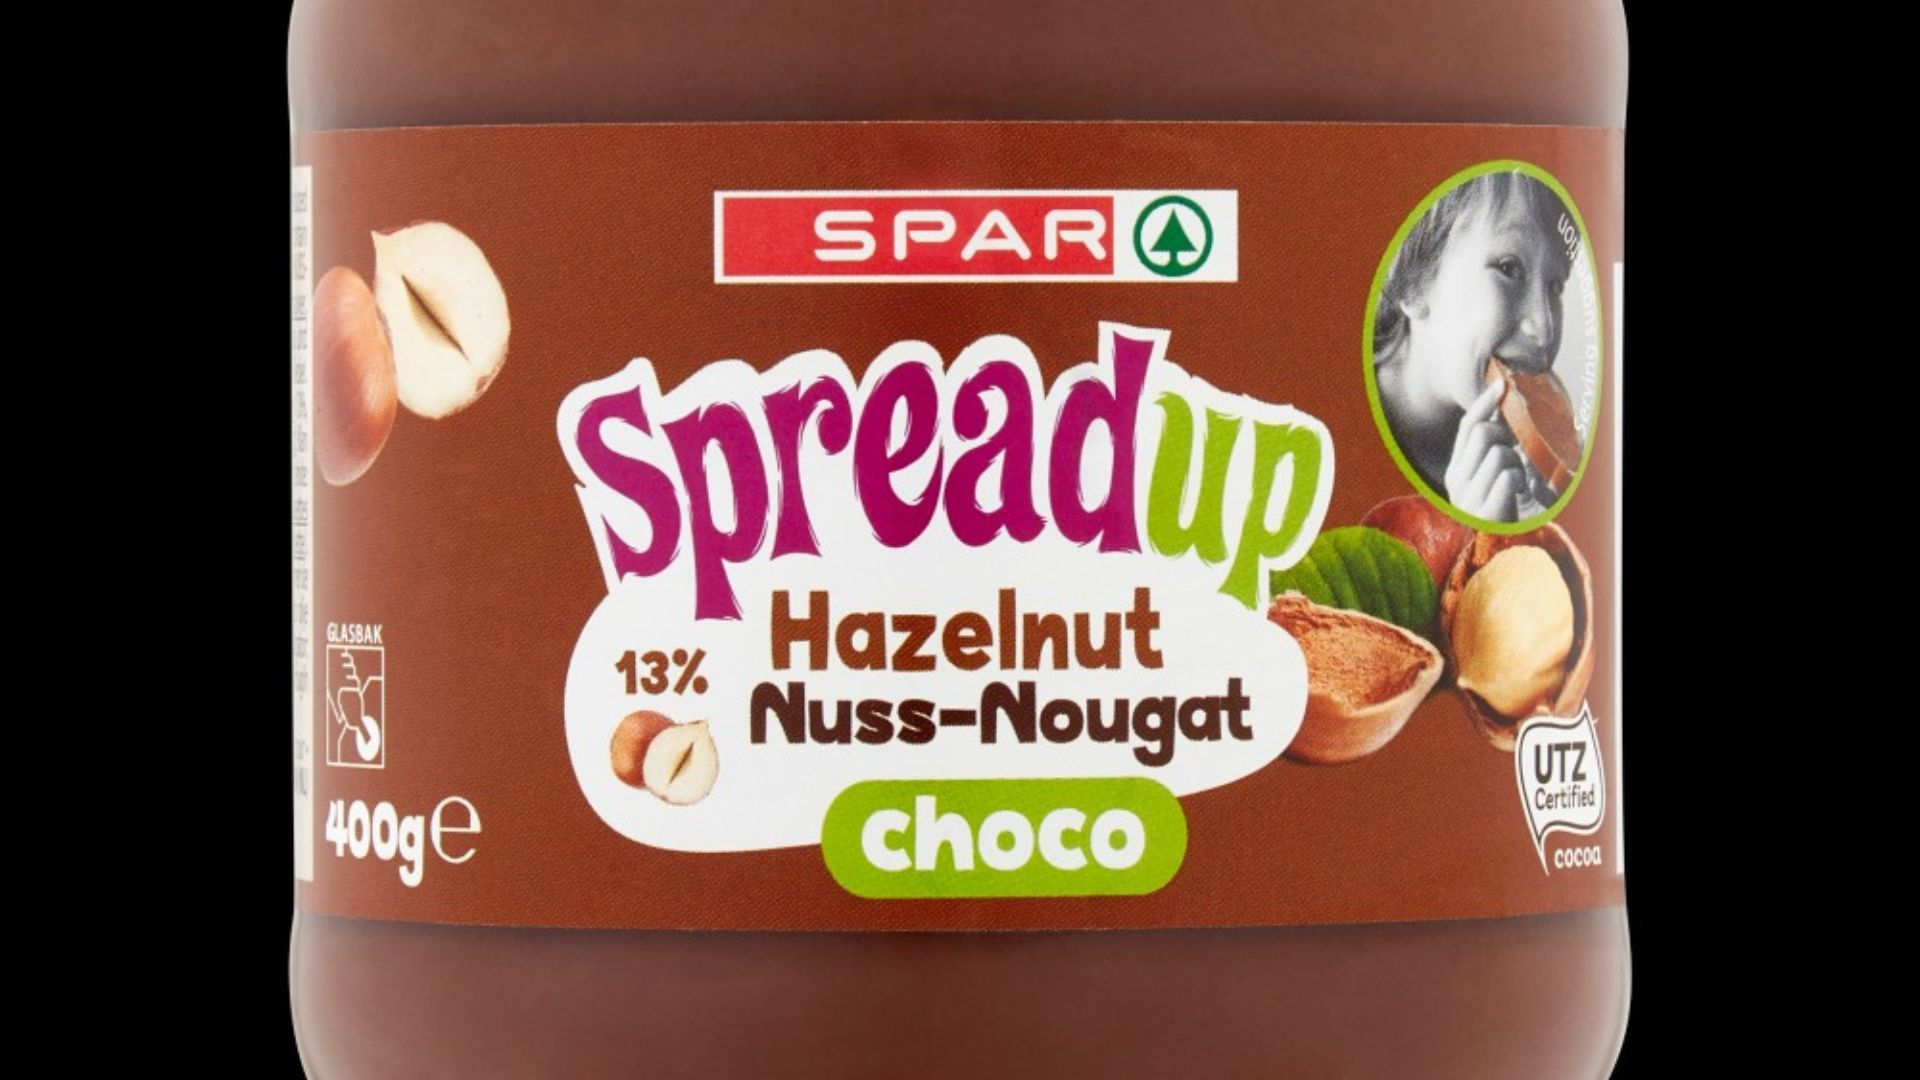 MoPH withdraws a spreadable chocolate product from the Qatar market